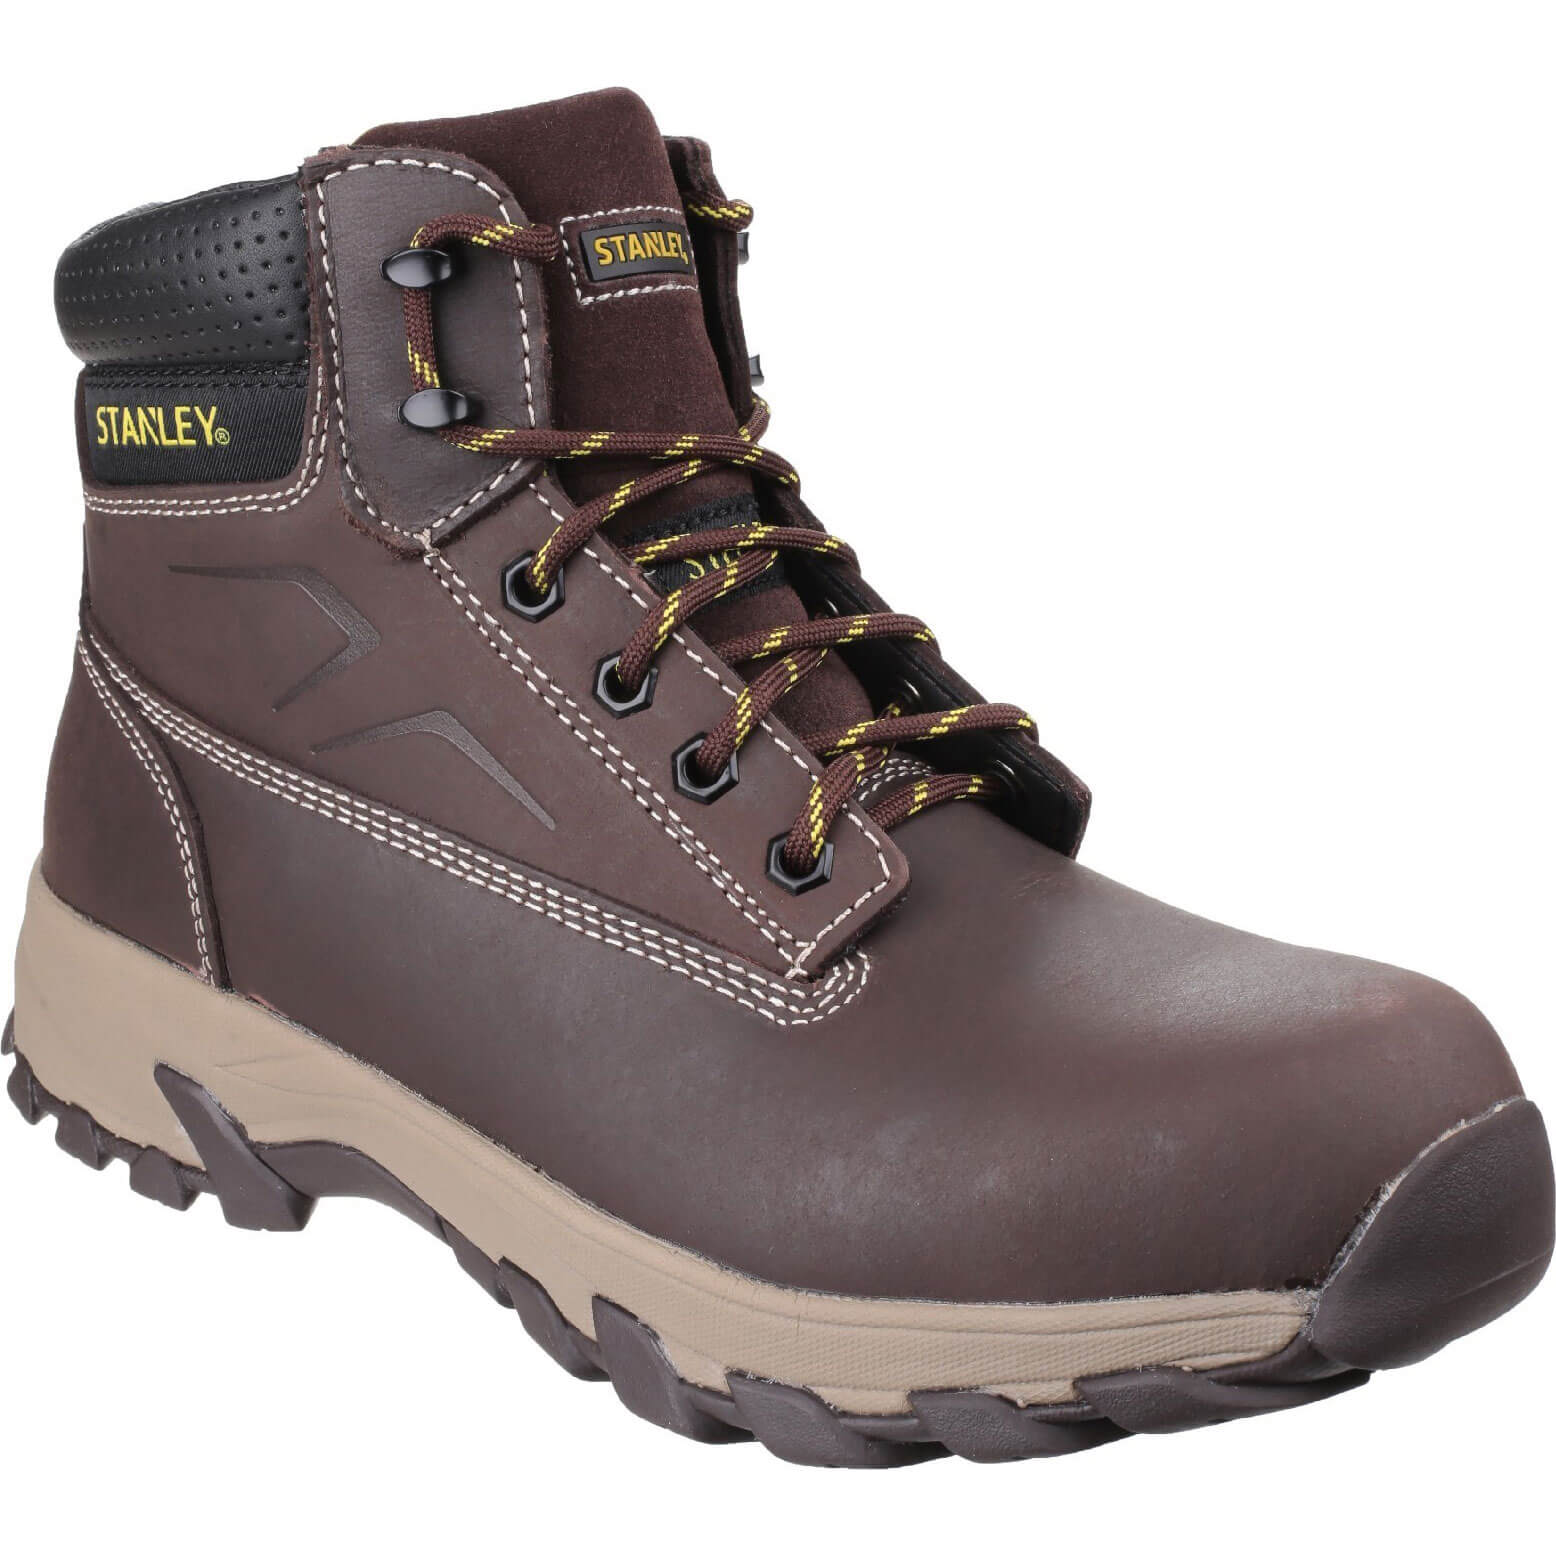 Stanley Tradesman Safety Boots Brown Size 12